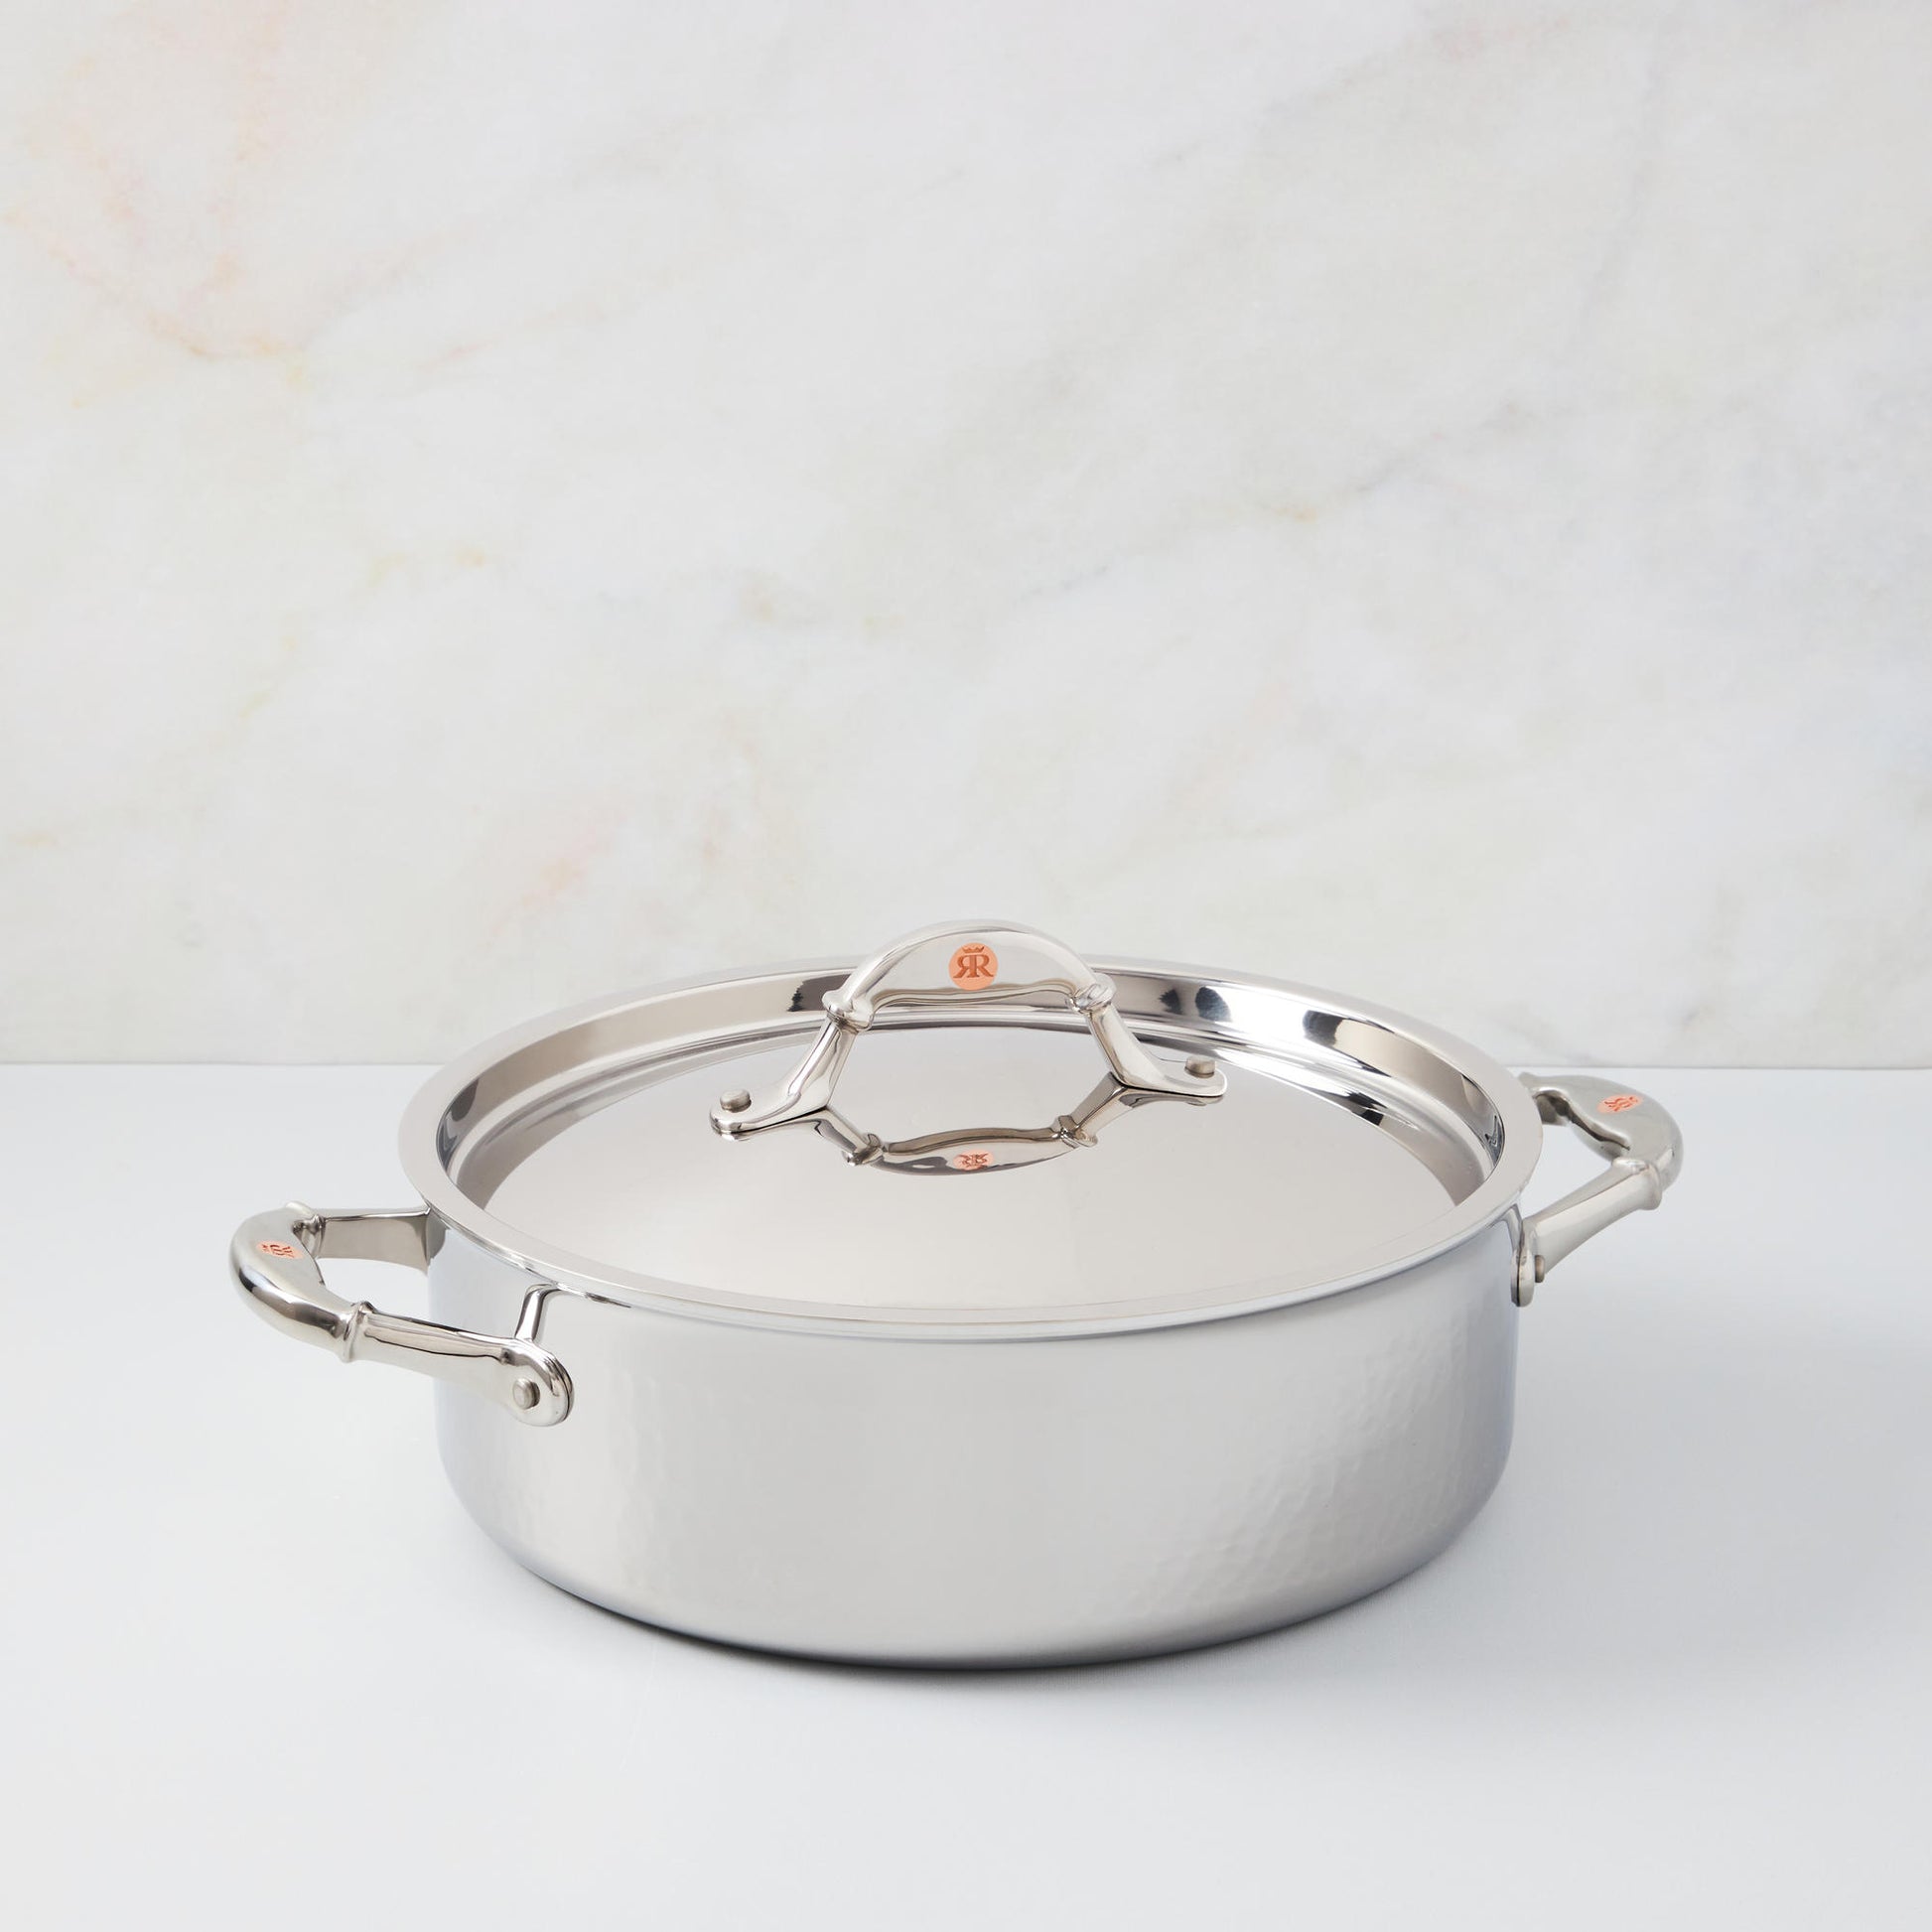 Hammered clad stainless steel covered braiser from Ruffoni